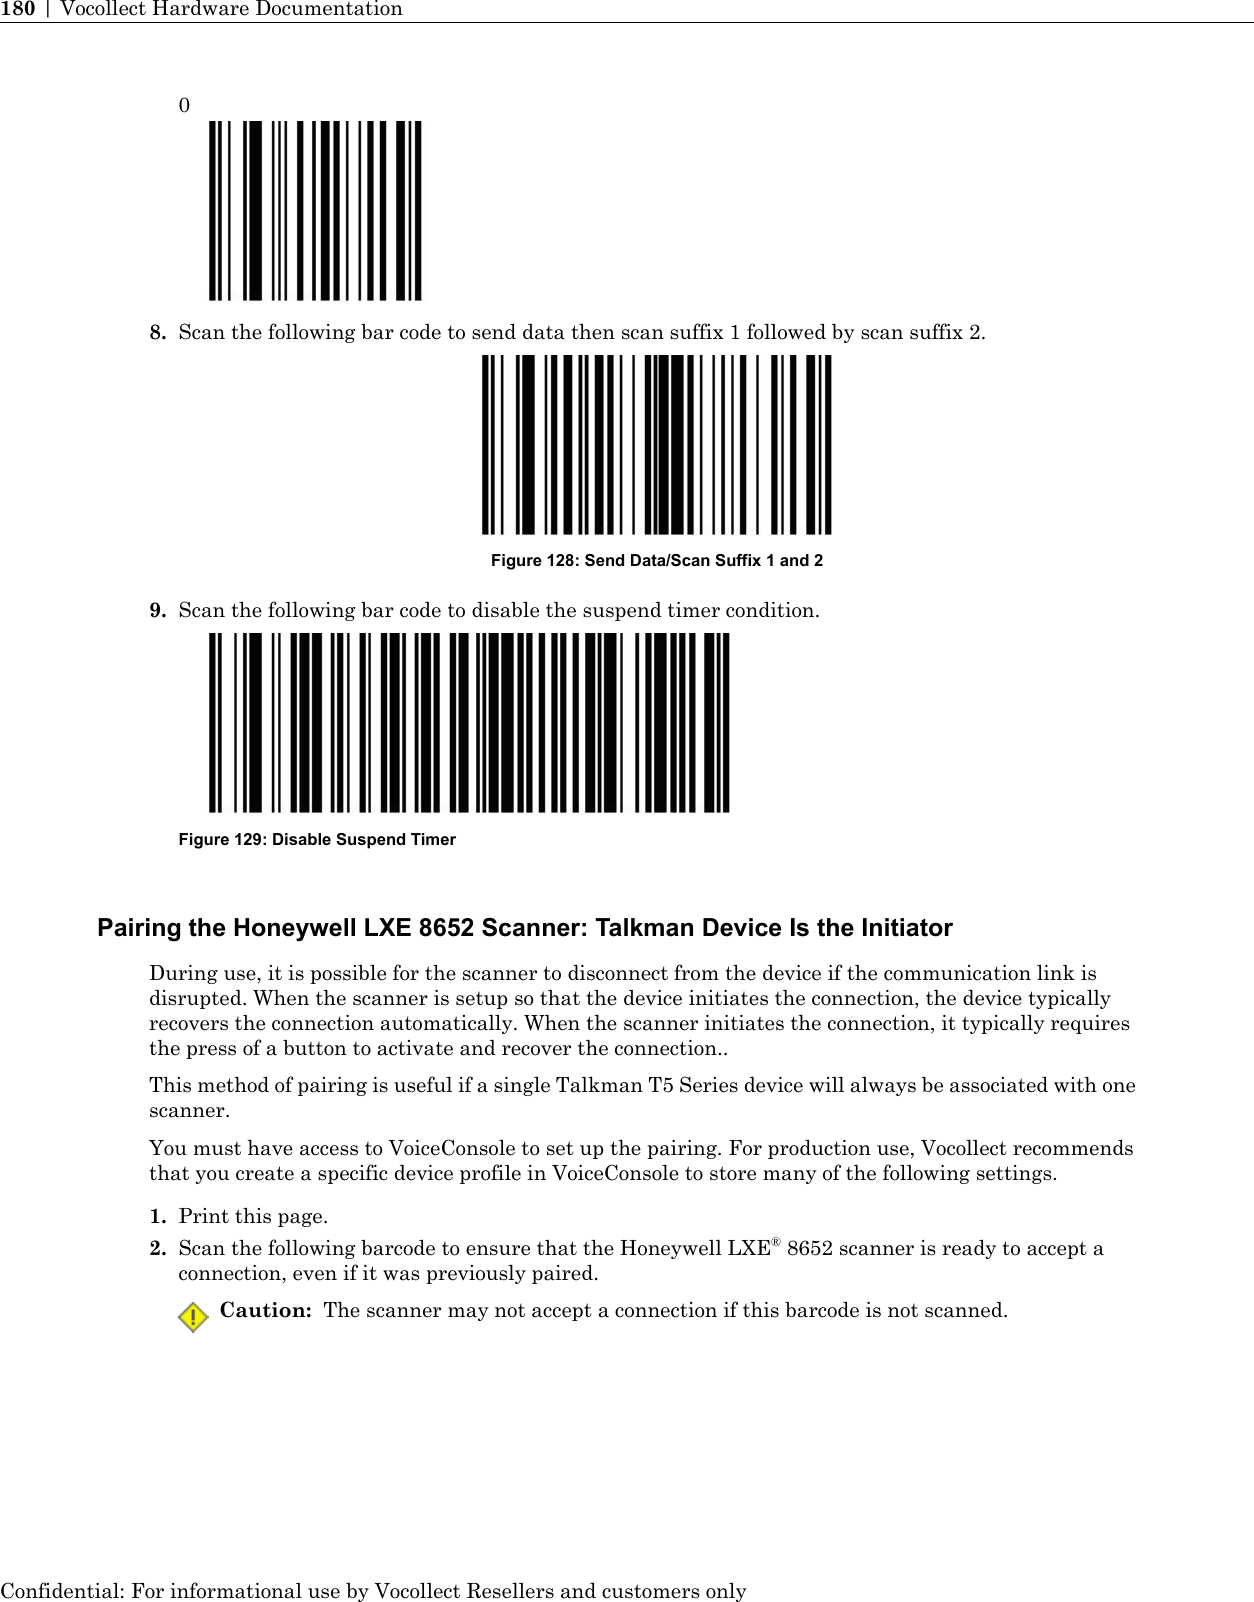 08. Scan the following bar code to send data then scan suffix 1 followed by scan suffix 2.Figure 128: Send Data/Scan Suffix 1 and 29. Scan the following bar code to disable the suspend timer condition.Figure 129: Disable Suspend TimerPairing the Honeywell LXE 8652 Scanner: Talkman Device Is the InitiatorDuring use, it is possible for the scanner to disconnect from the device if the communication link isdisrupted. When the scanner is setup so that the device initiates the connection, the device typicallyrecovers the connection automatically. When the scanner initiates the connection, it typically requiresthe press of a button to activate and recover the connection..This method of pairing is useful if a single Talkman T5 Series device will always be associated with onescanner.You must have access to VoiceConsole to set up the pairing. For production use, Vocollect recommendsthat you create a specific device profile in VoiceConsole to store many of the following settings.1. Print this page.2. Scan the following barcode to ensure that the Honeywell LXE®8652 scanner is ready to accept aconnection, even if it was previously paired.Caution: The scanner may not accept a connection if this barcode is not scanned.Confidential: For informational use by Vocollect Resellers and customers only180 | Vocollect Hardware Documentation